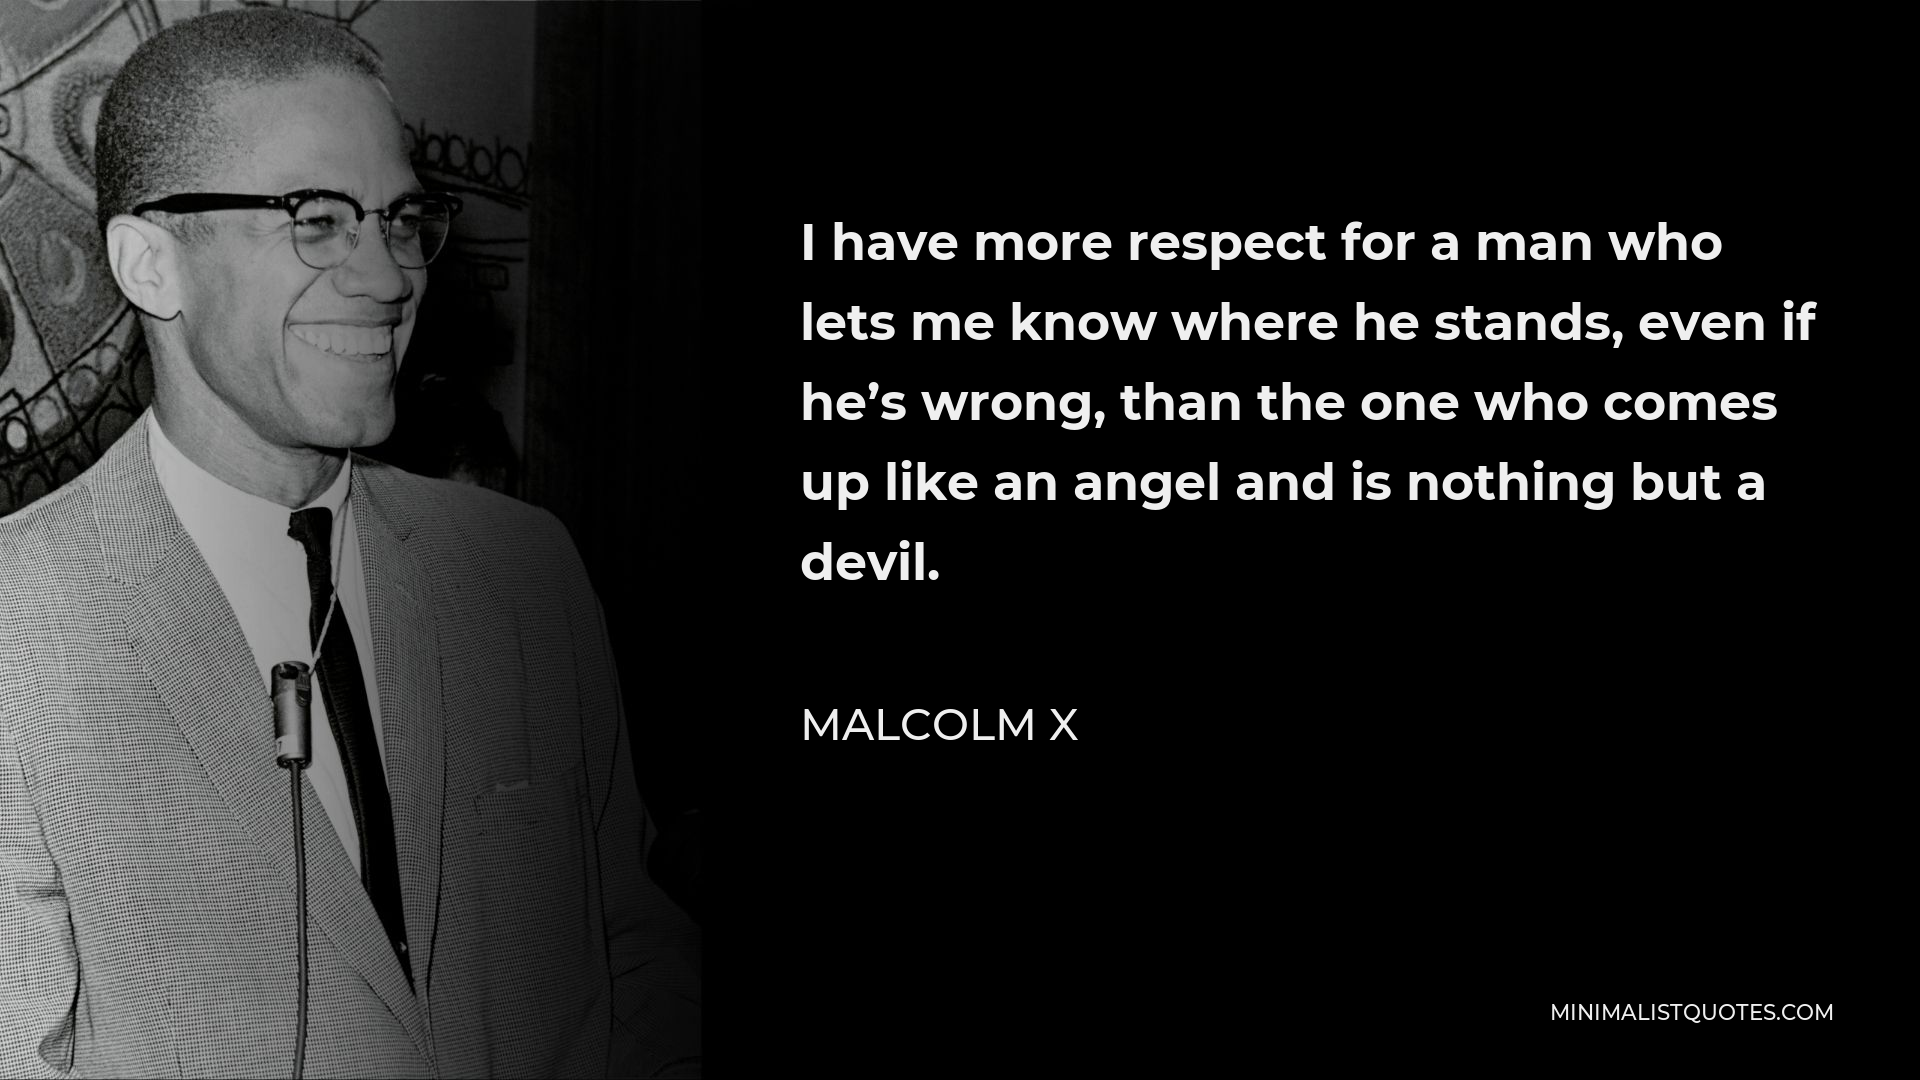 Malcolm X Quote - I have more respect for a man who lets me know where he stands, even if he’s wrong, than the one who comes up like an angel and is nothing but a devil.